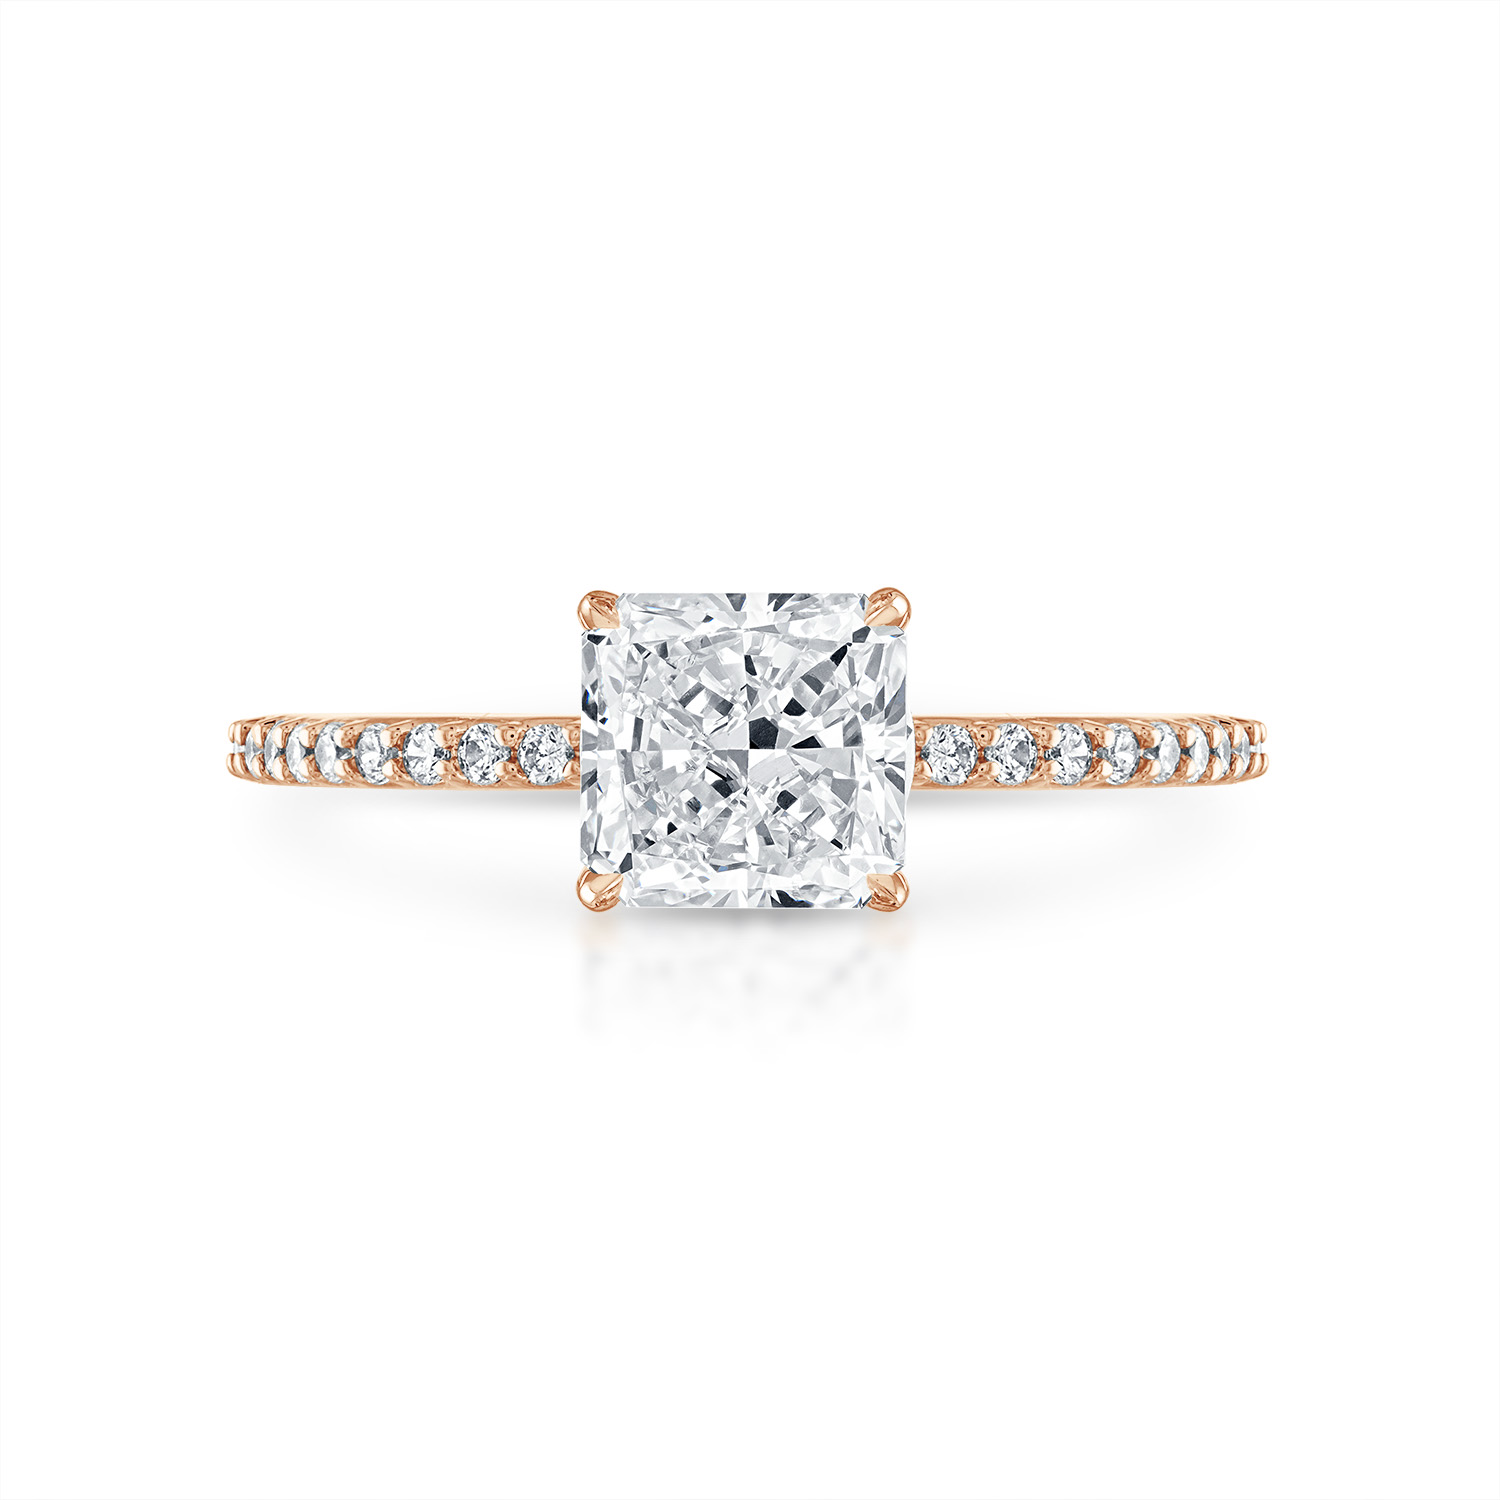 Radiant Pave with Pave Underbezel Engagement Ring in Rose Gold